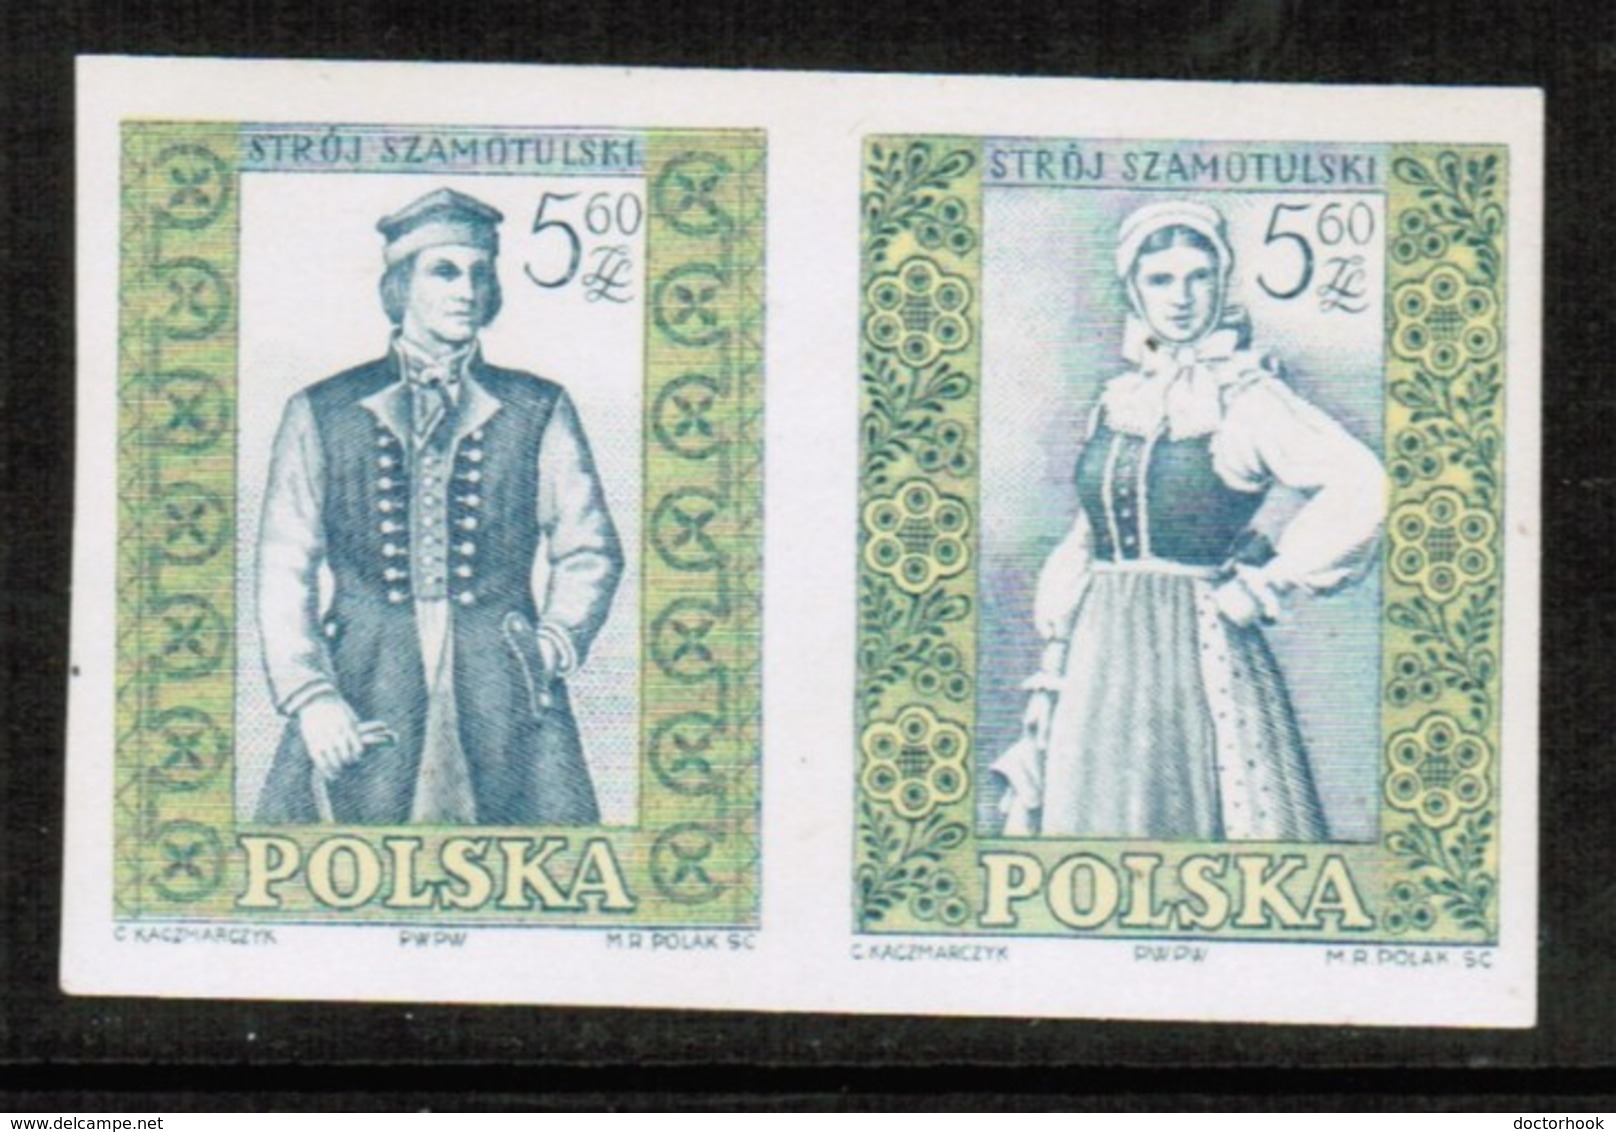 POLAND  Scott # 902-3** VF MINT NH IMPERFORATE PAIR (Stamp Scan # 499) - Unused Stamps